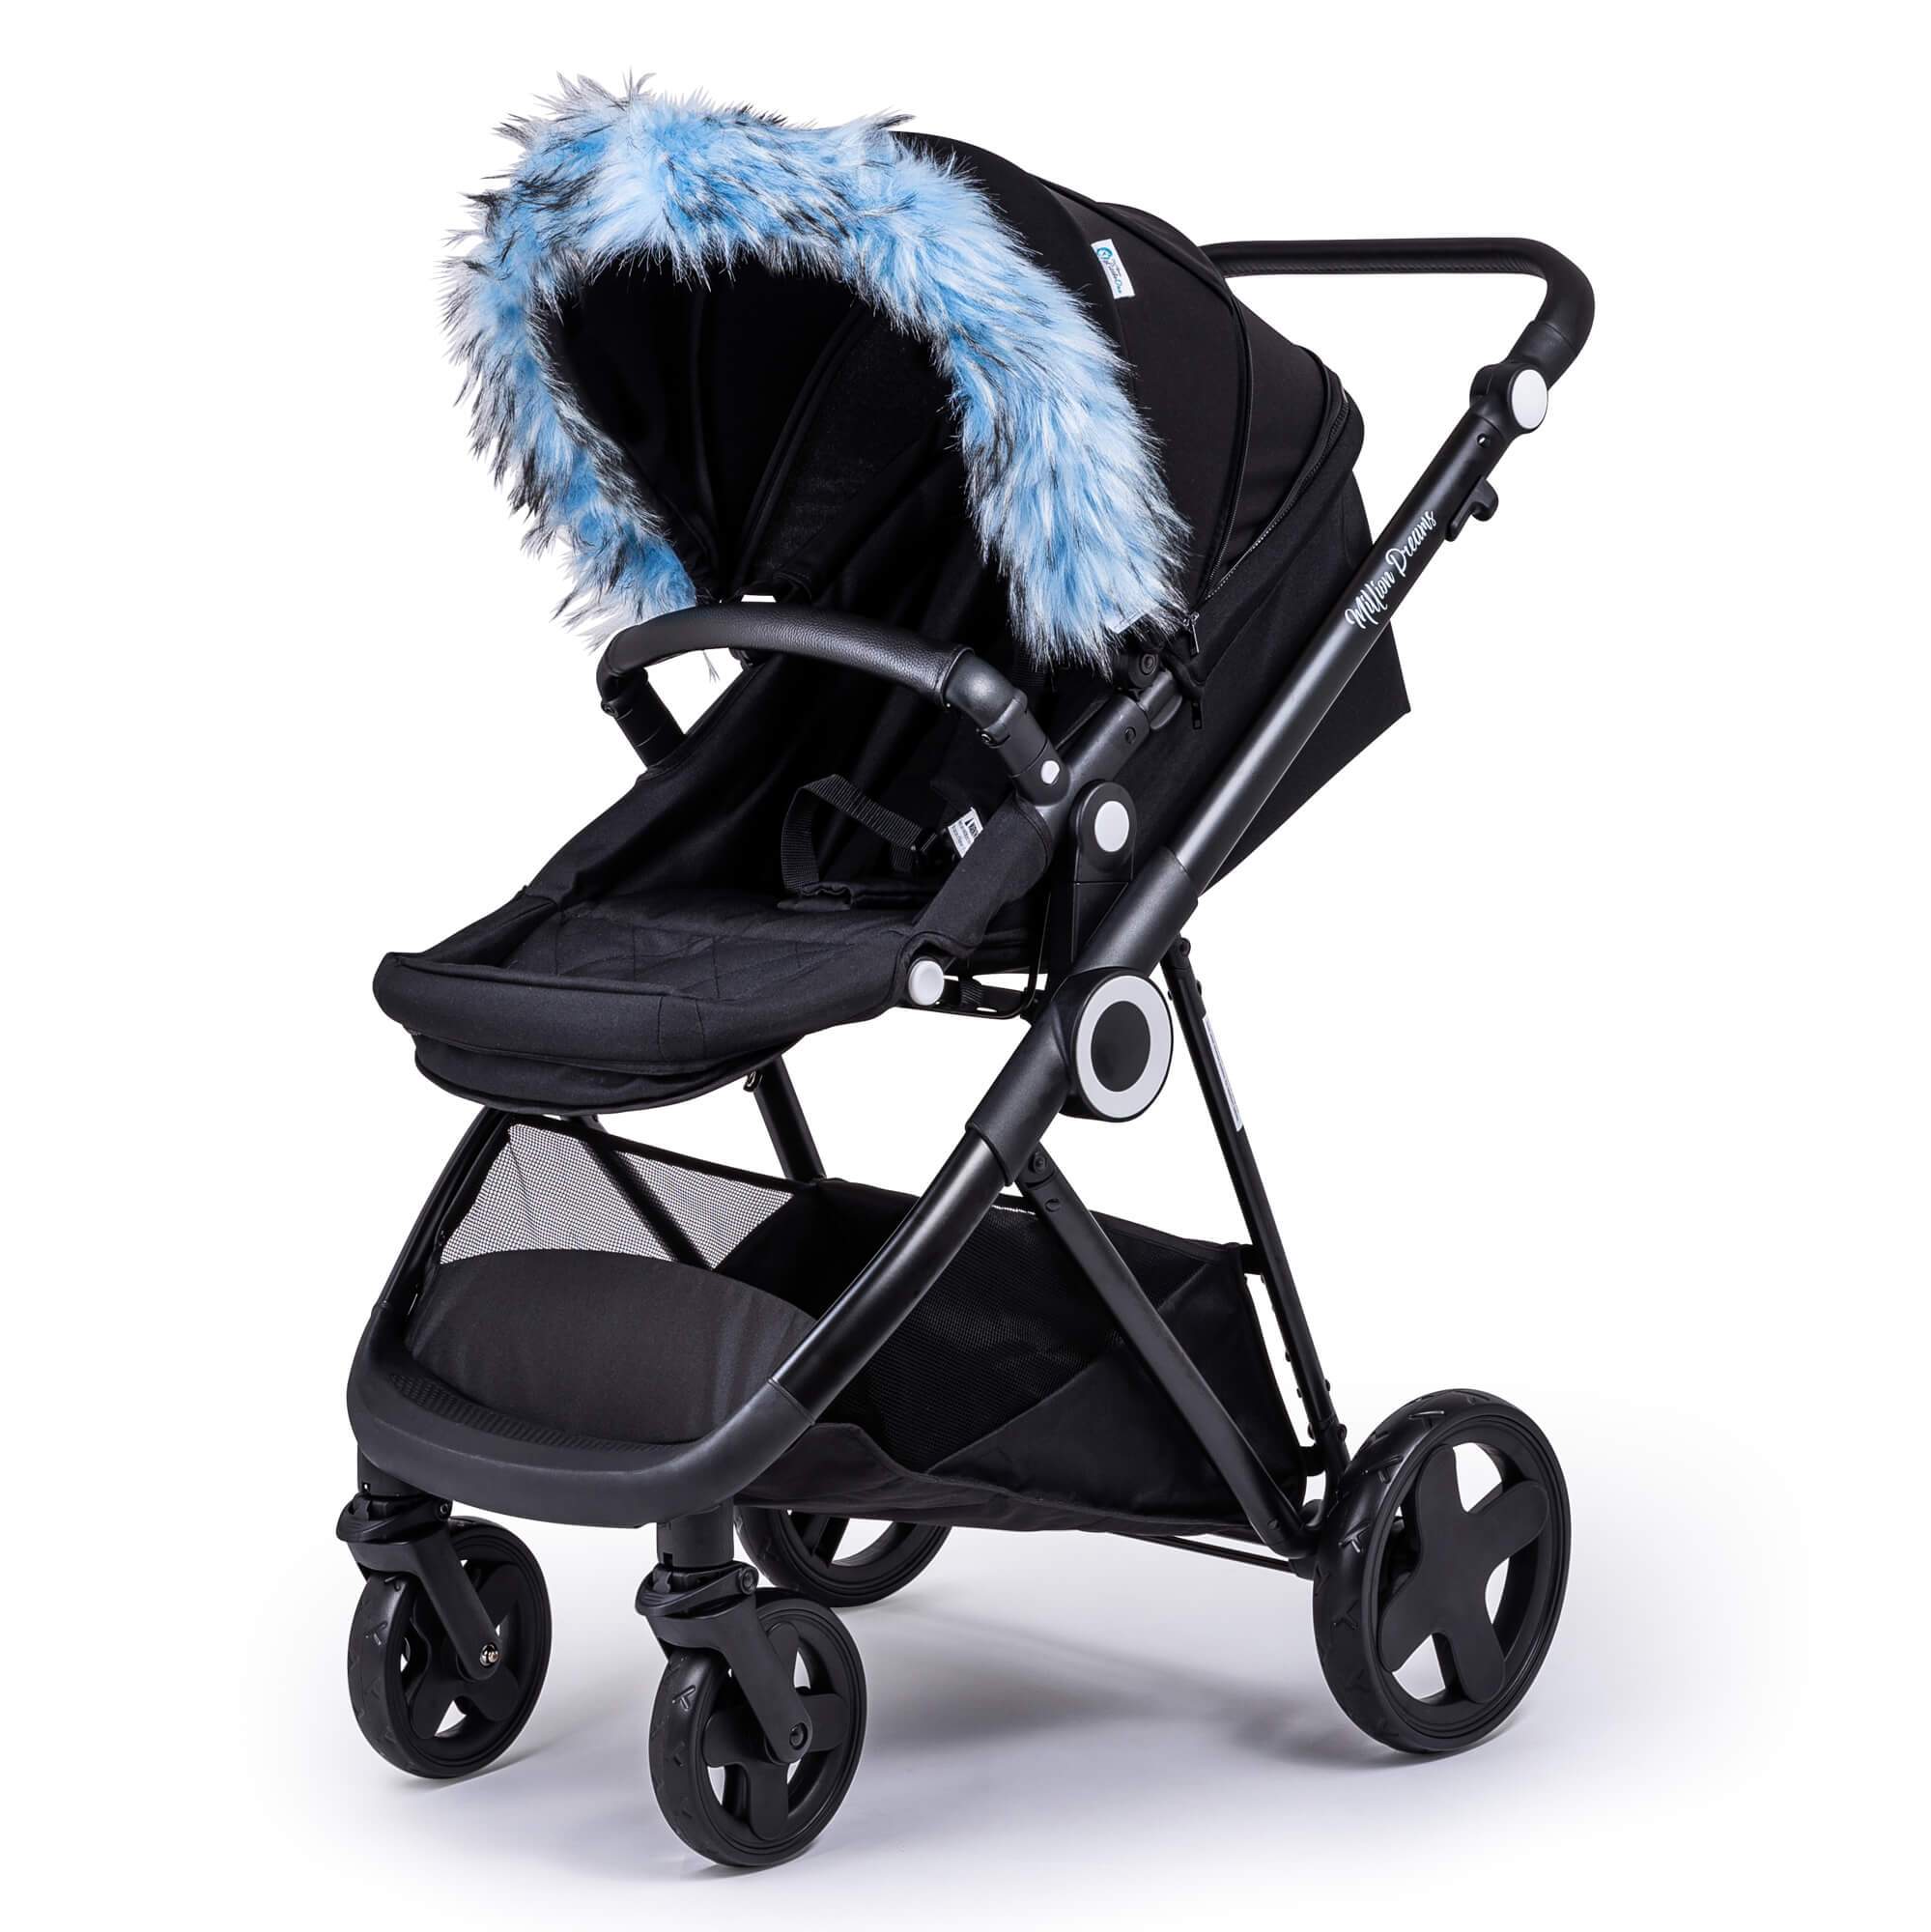 Pram Fur Hood Trim Attachment for Pushchair Compatible with Safety 1st - Light Blue / Fits All Models | For Your Little One